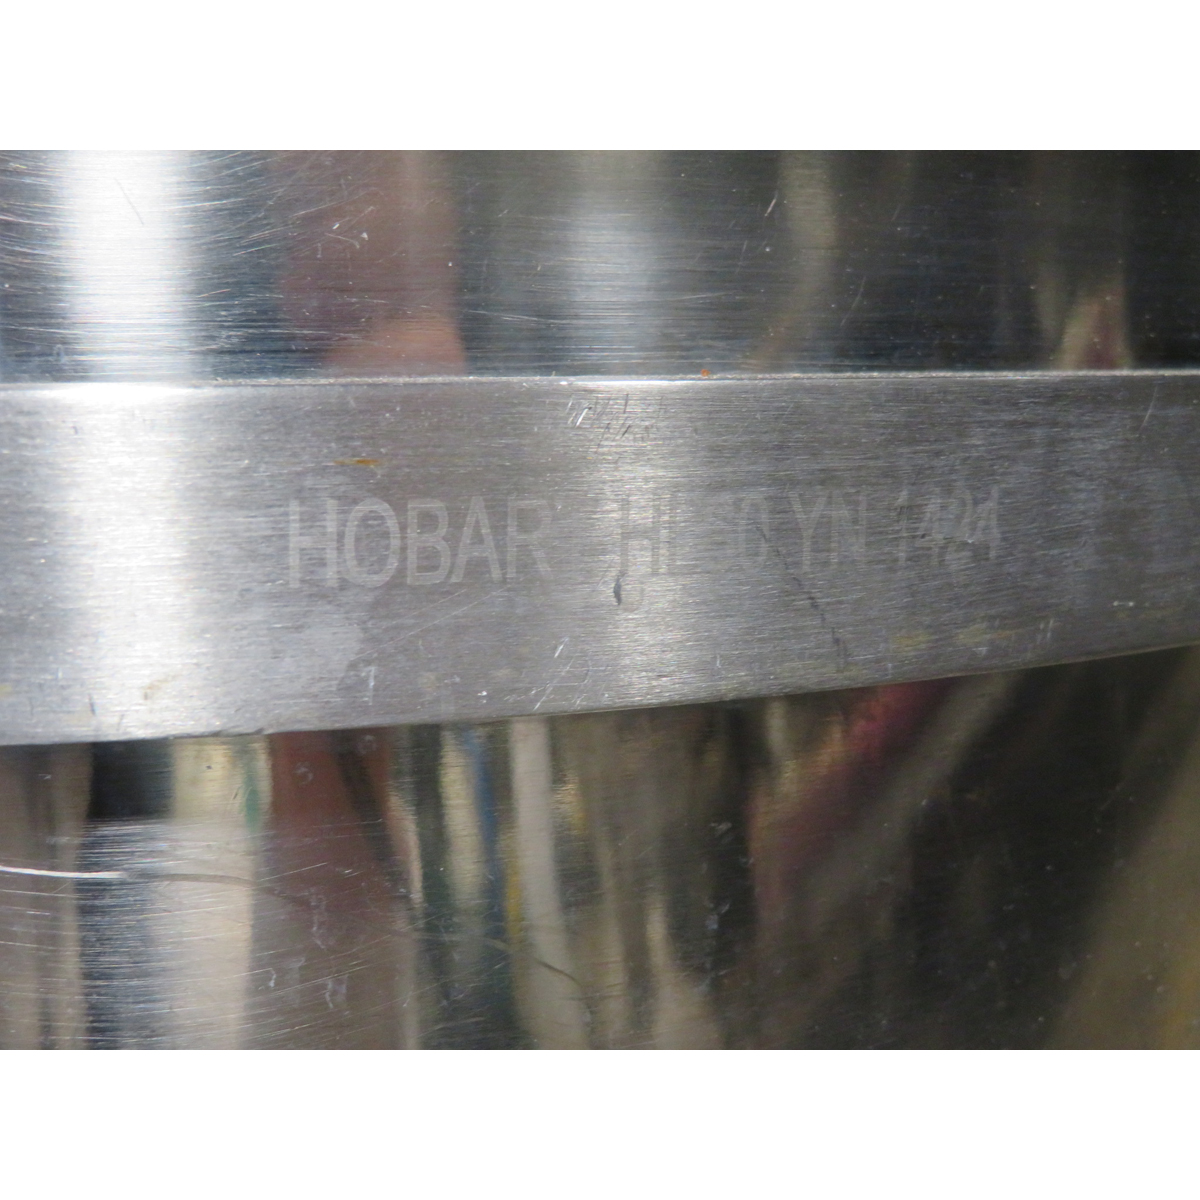 Hobart BOWL-HL60 Stainless Steel 60 Qt Bowl for HL600, Used Excellent Condition image 2